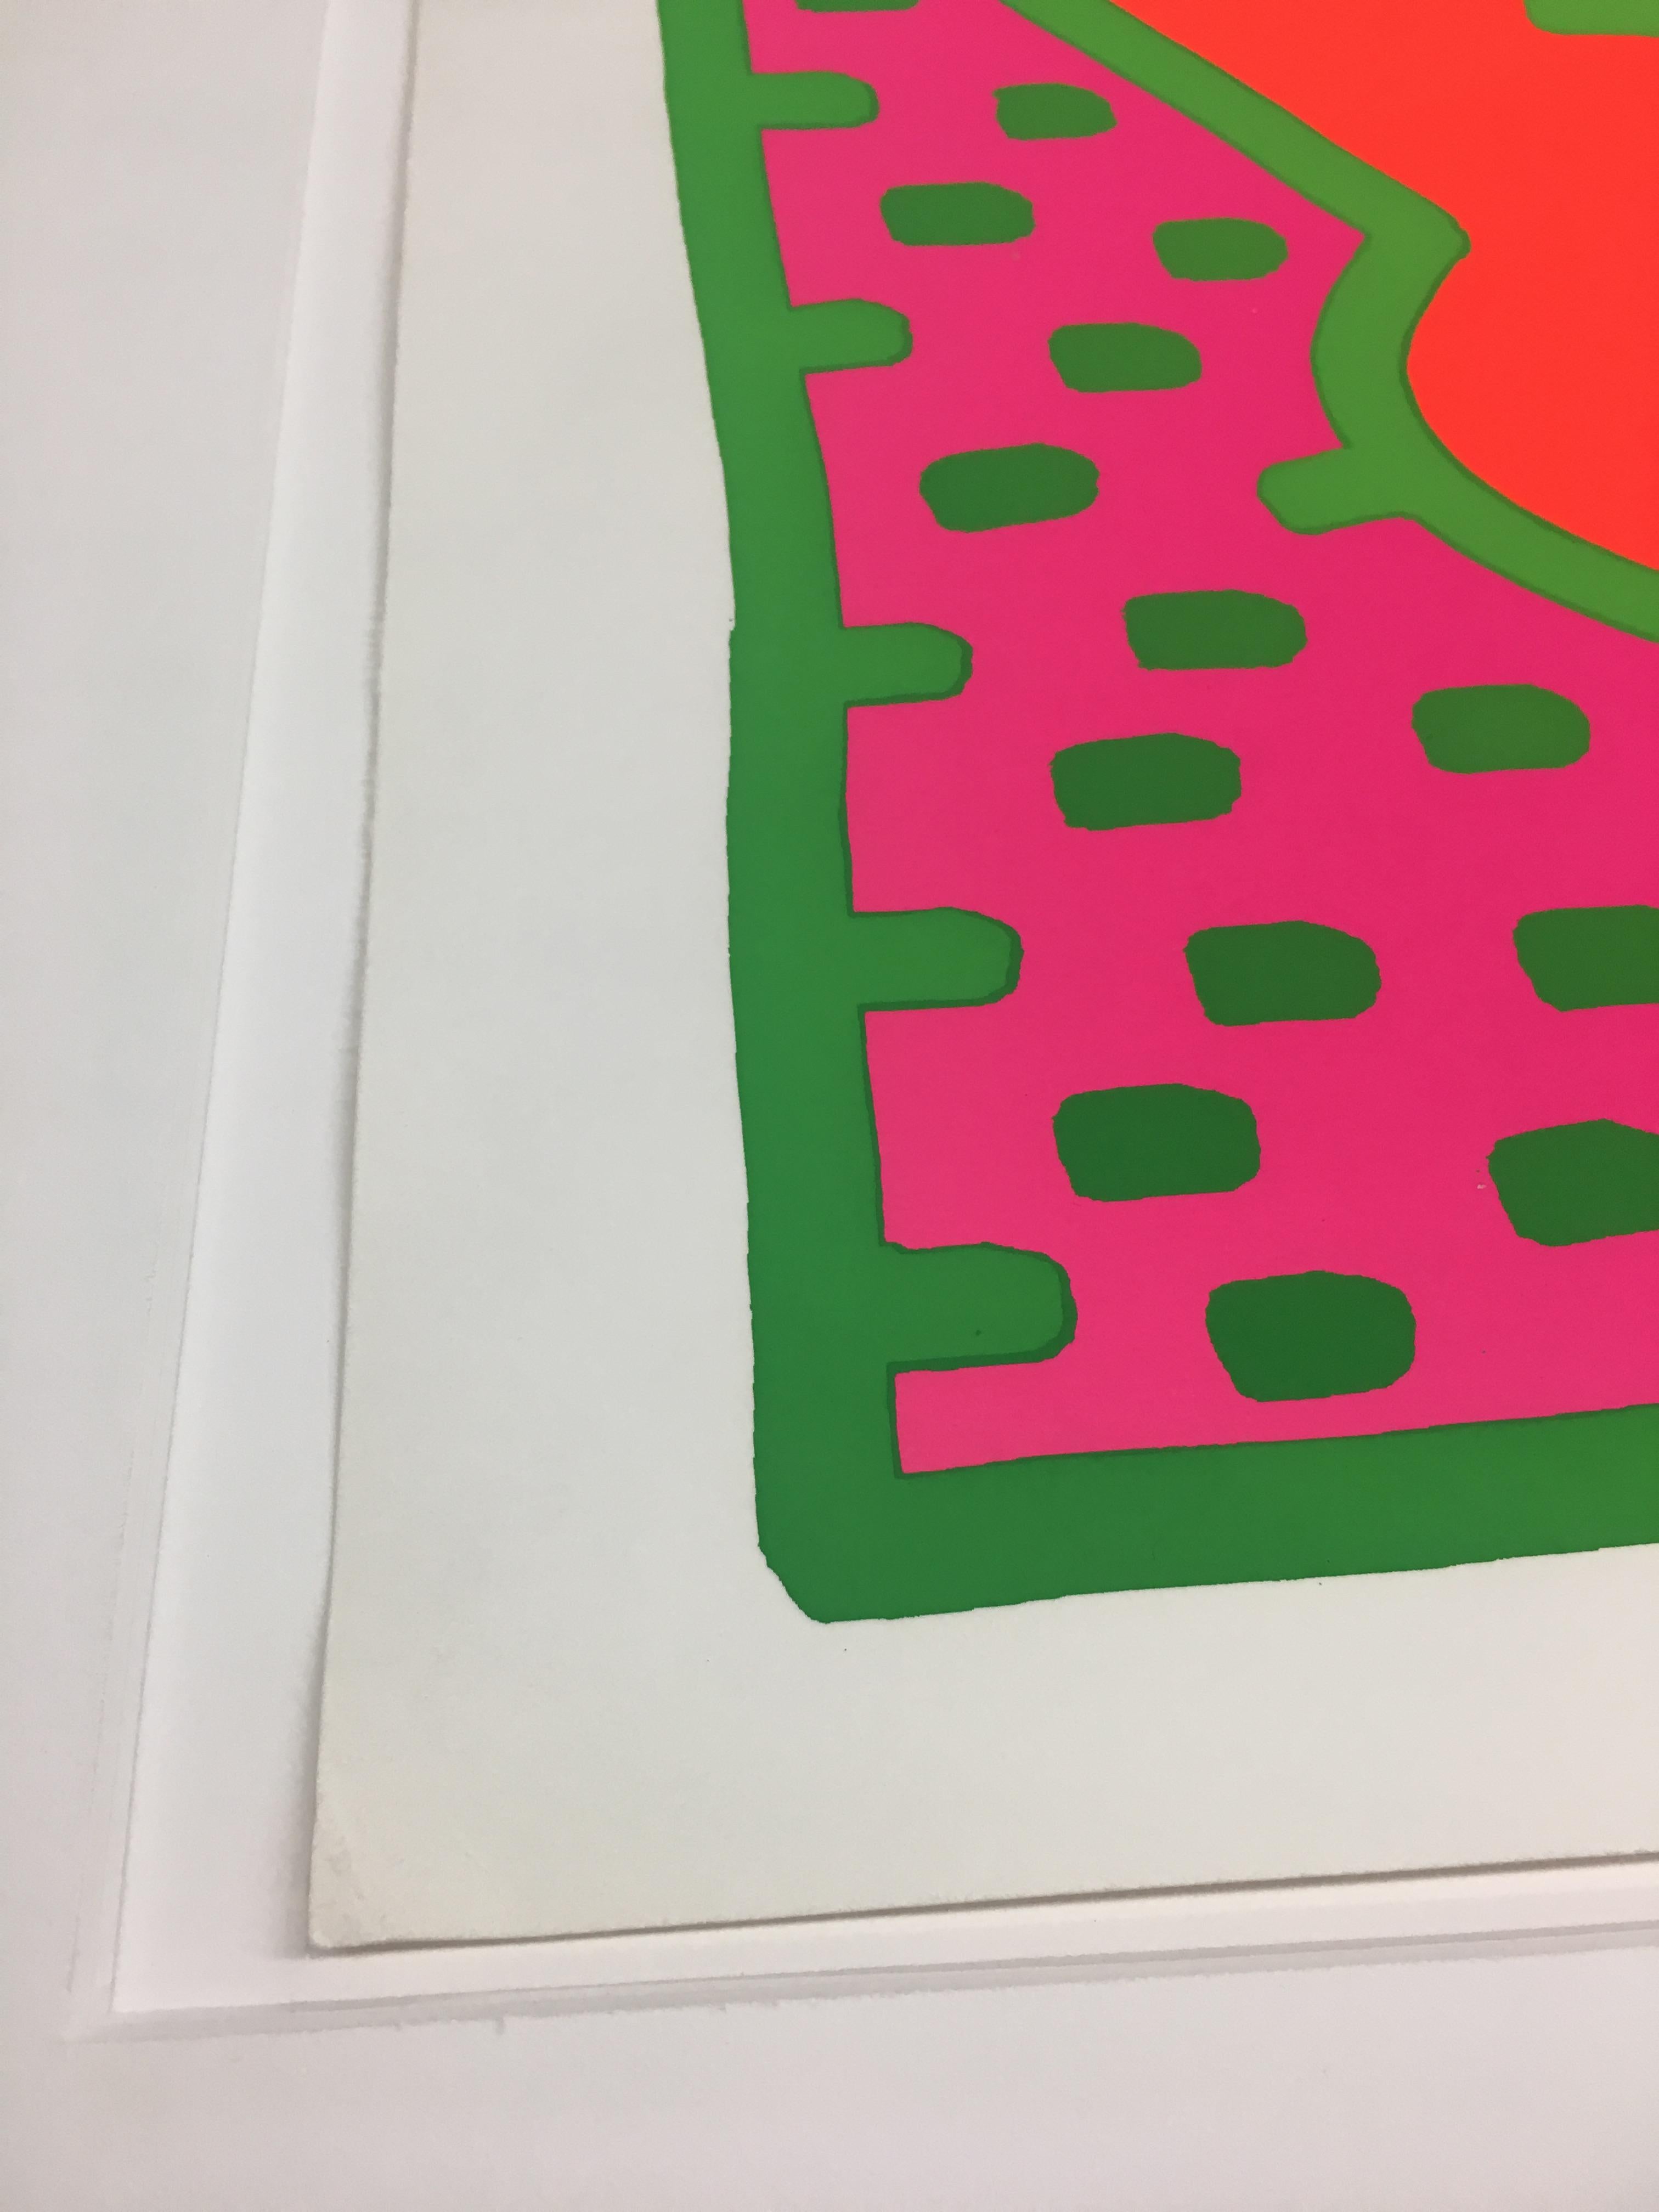 Plate II from Fertility Suite  - Contemporary Print by Keith Haring